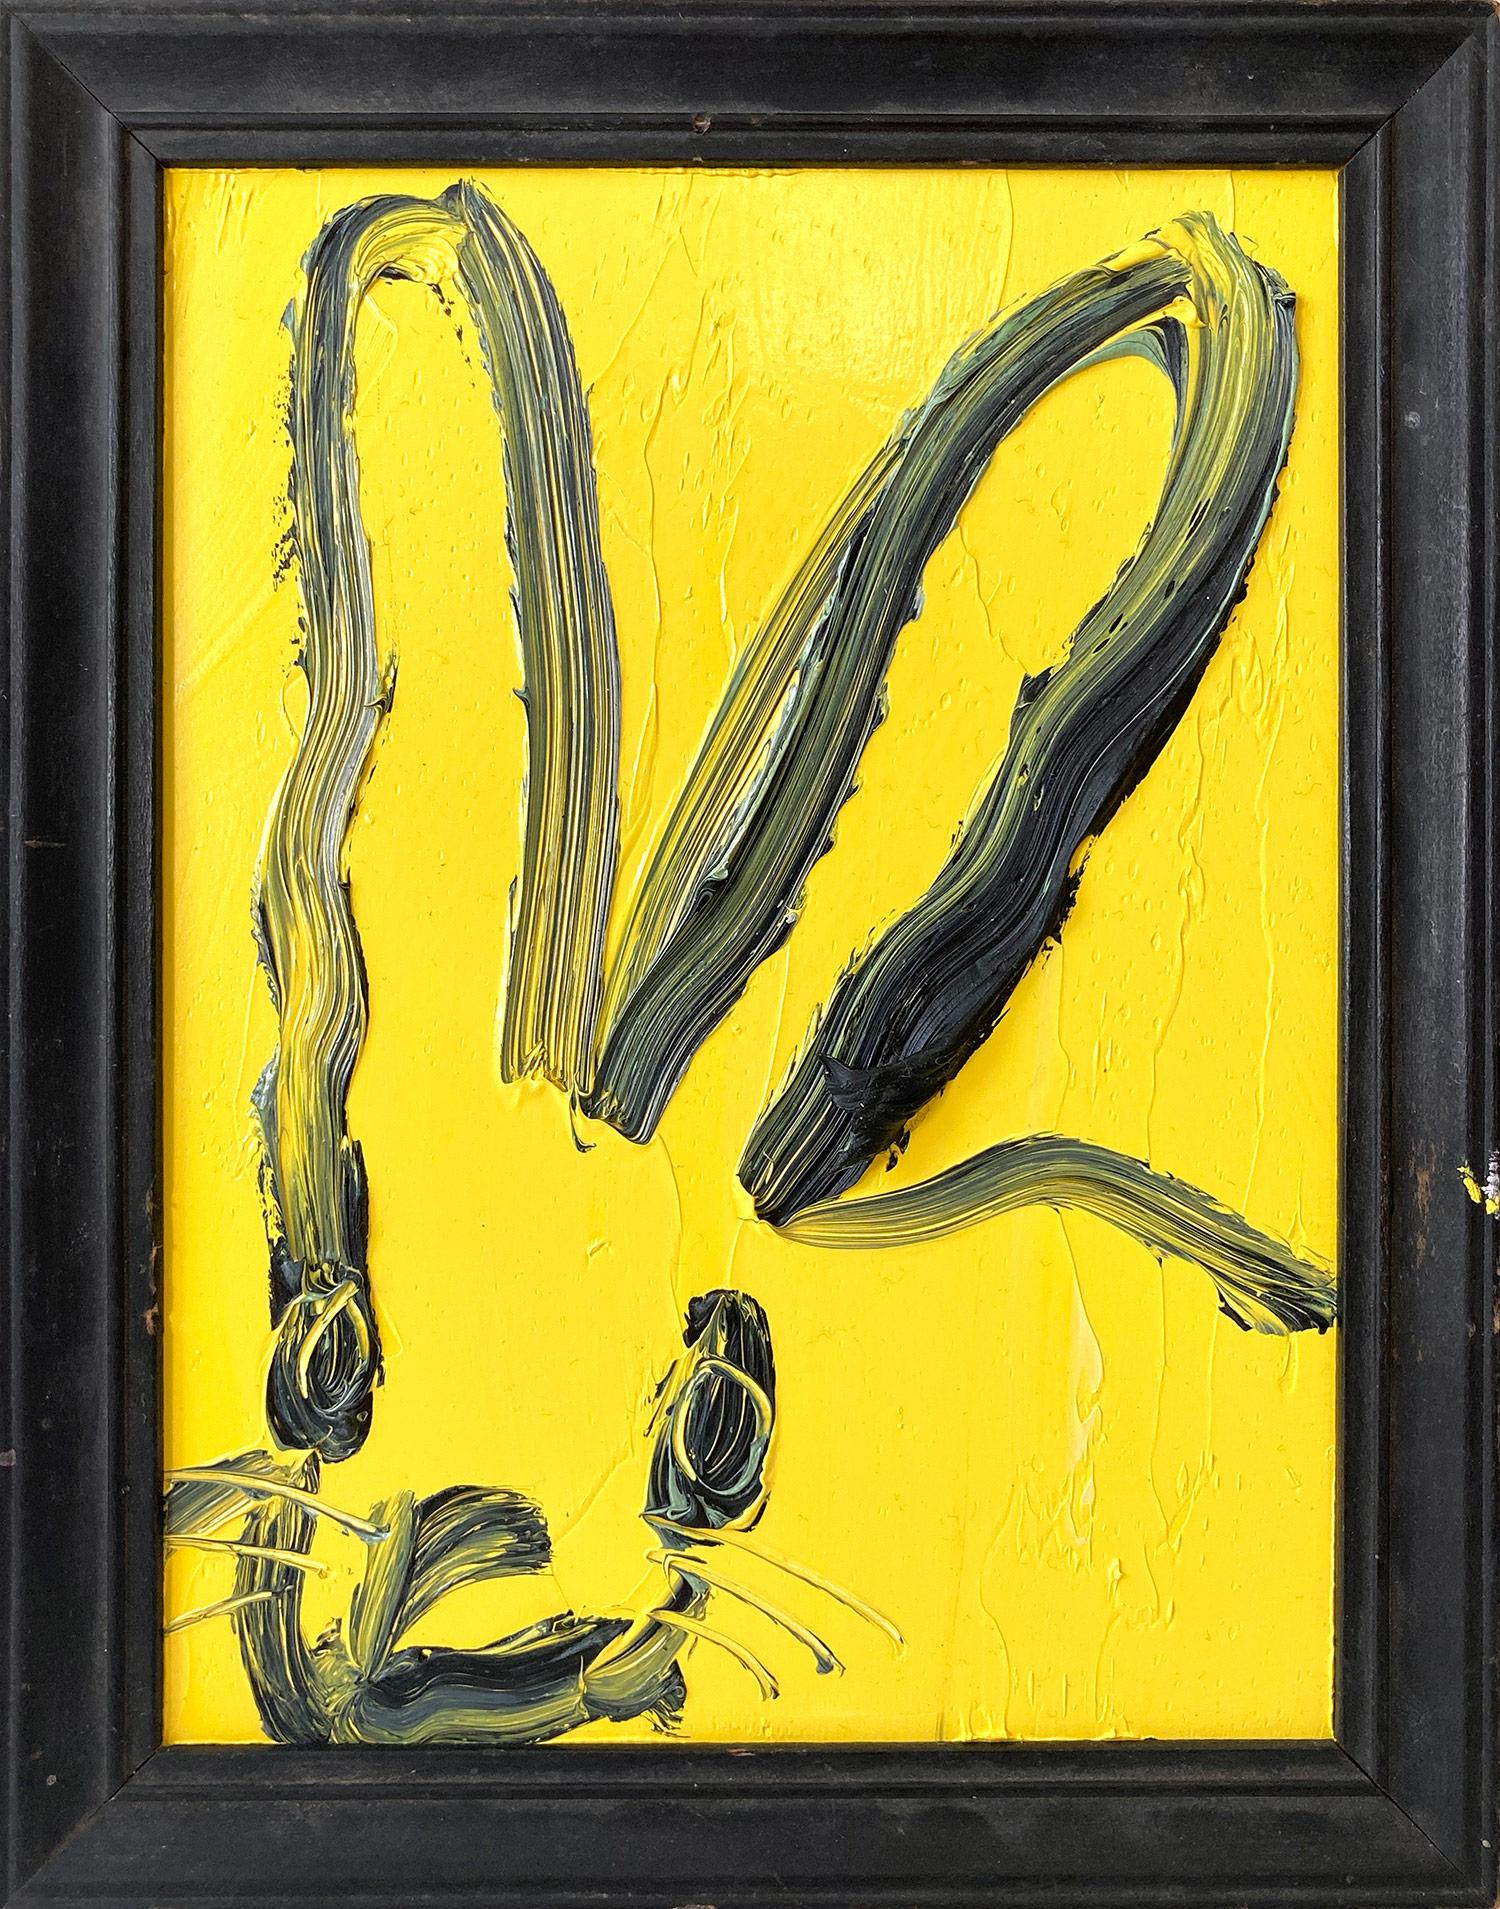 Hunt Slonem Animal Painting - "Hal" (Black Bunny on Royal Yellow Background) Oil Painting on Wood Panel